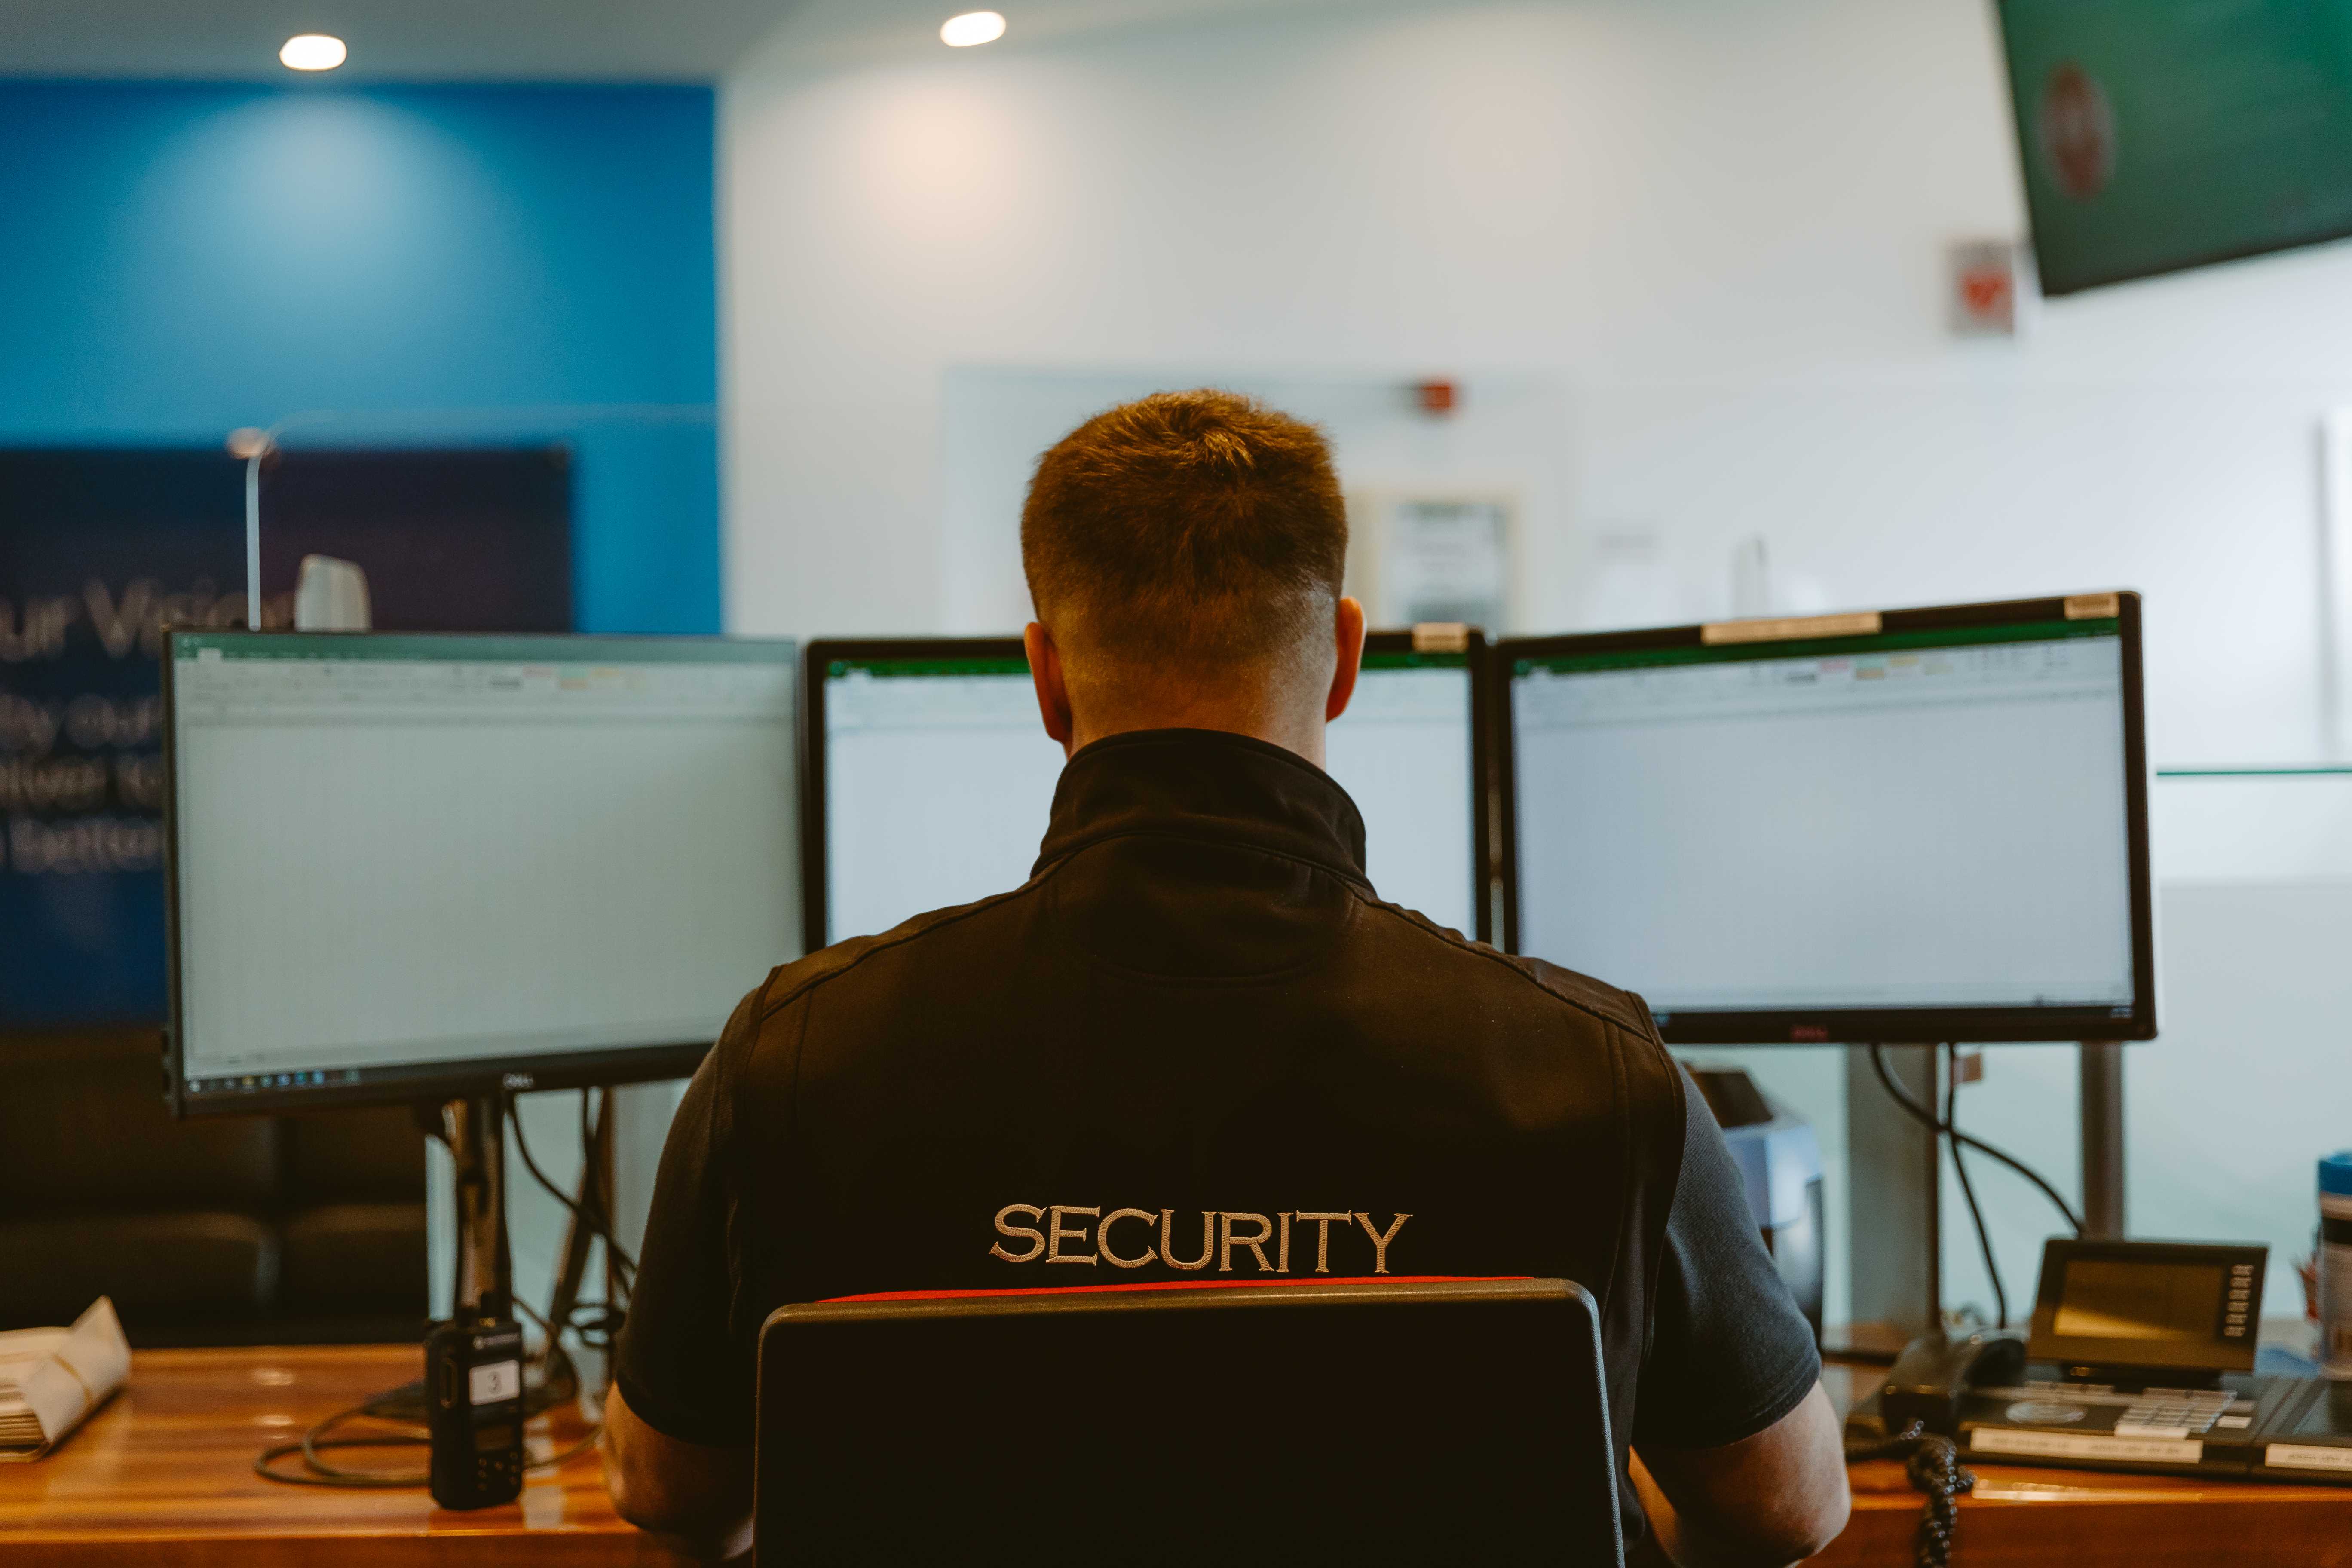 We have earned a reputation as a market leader in providing a wide range of security services